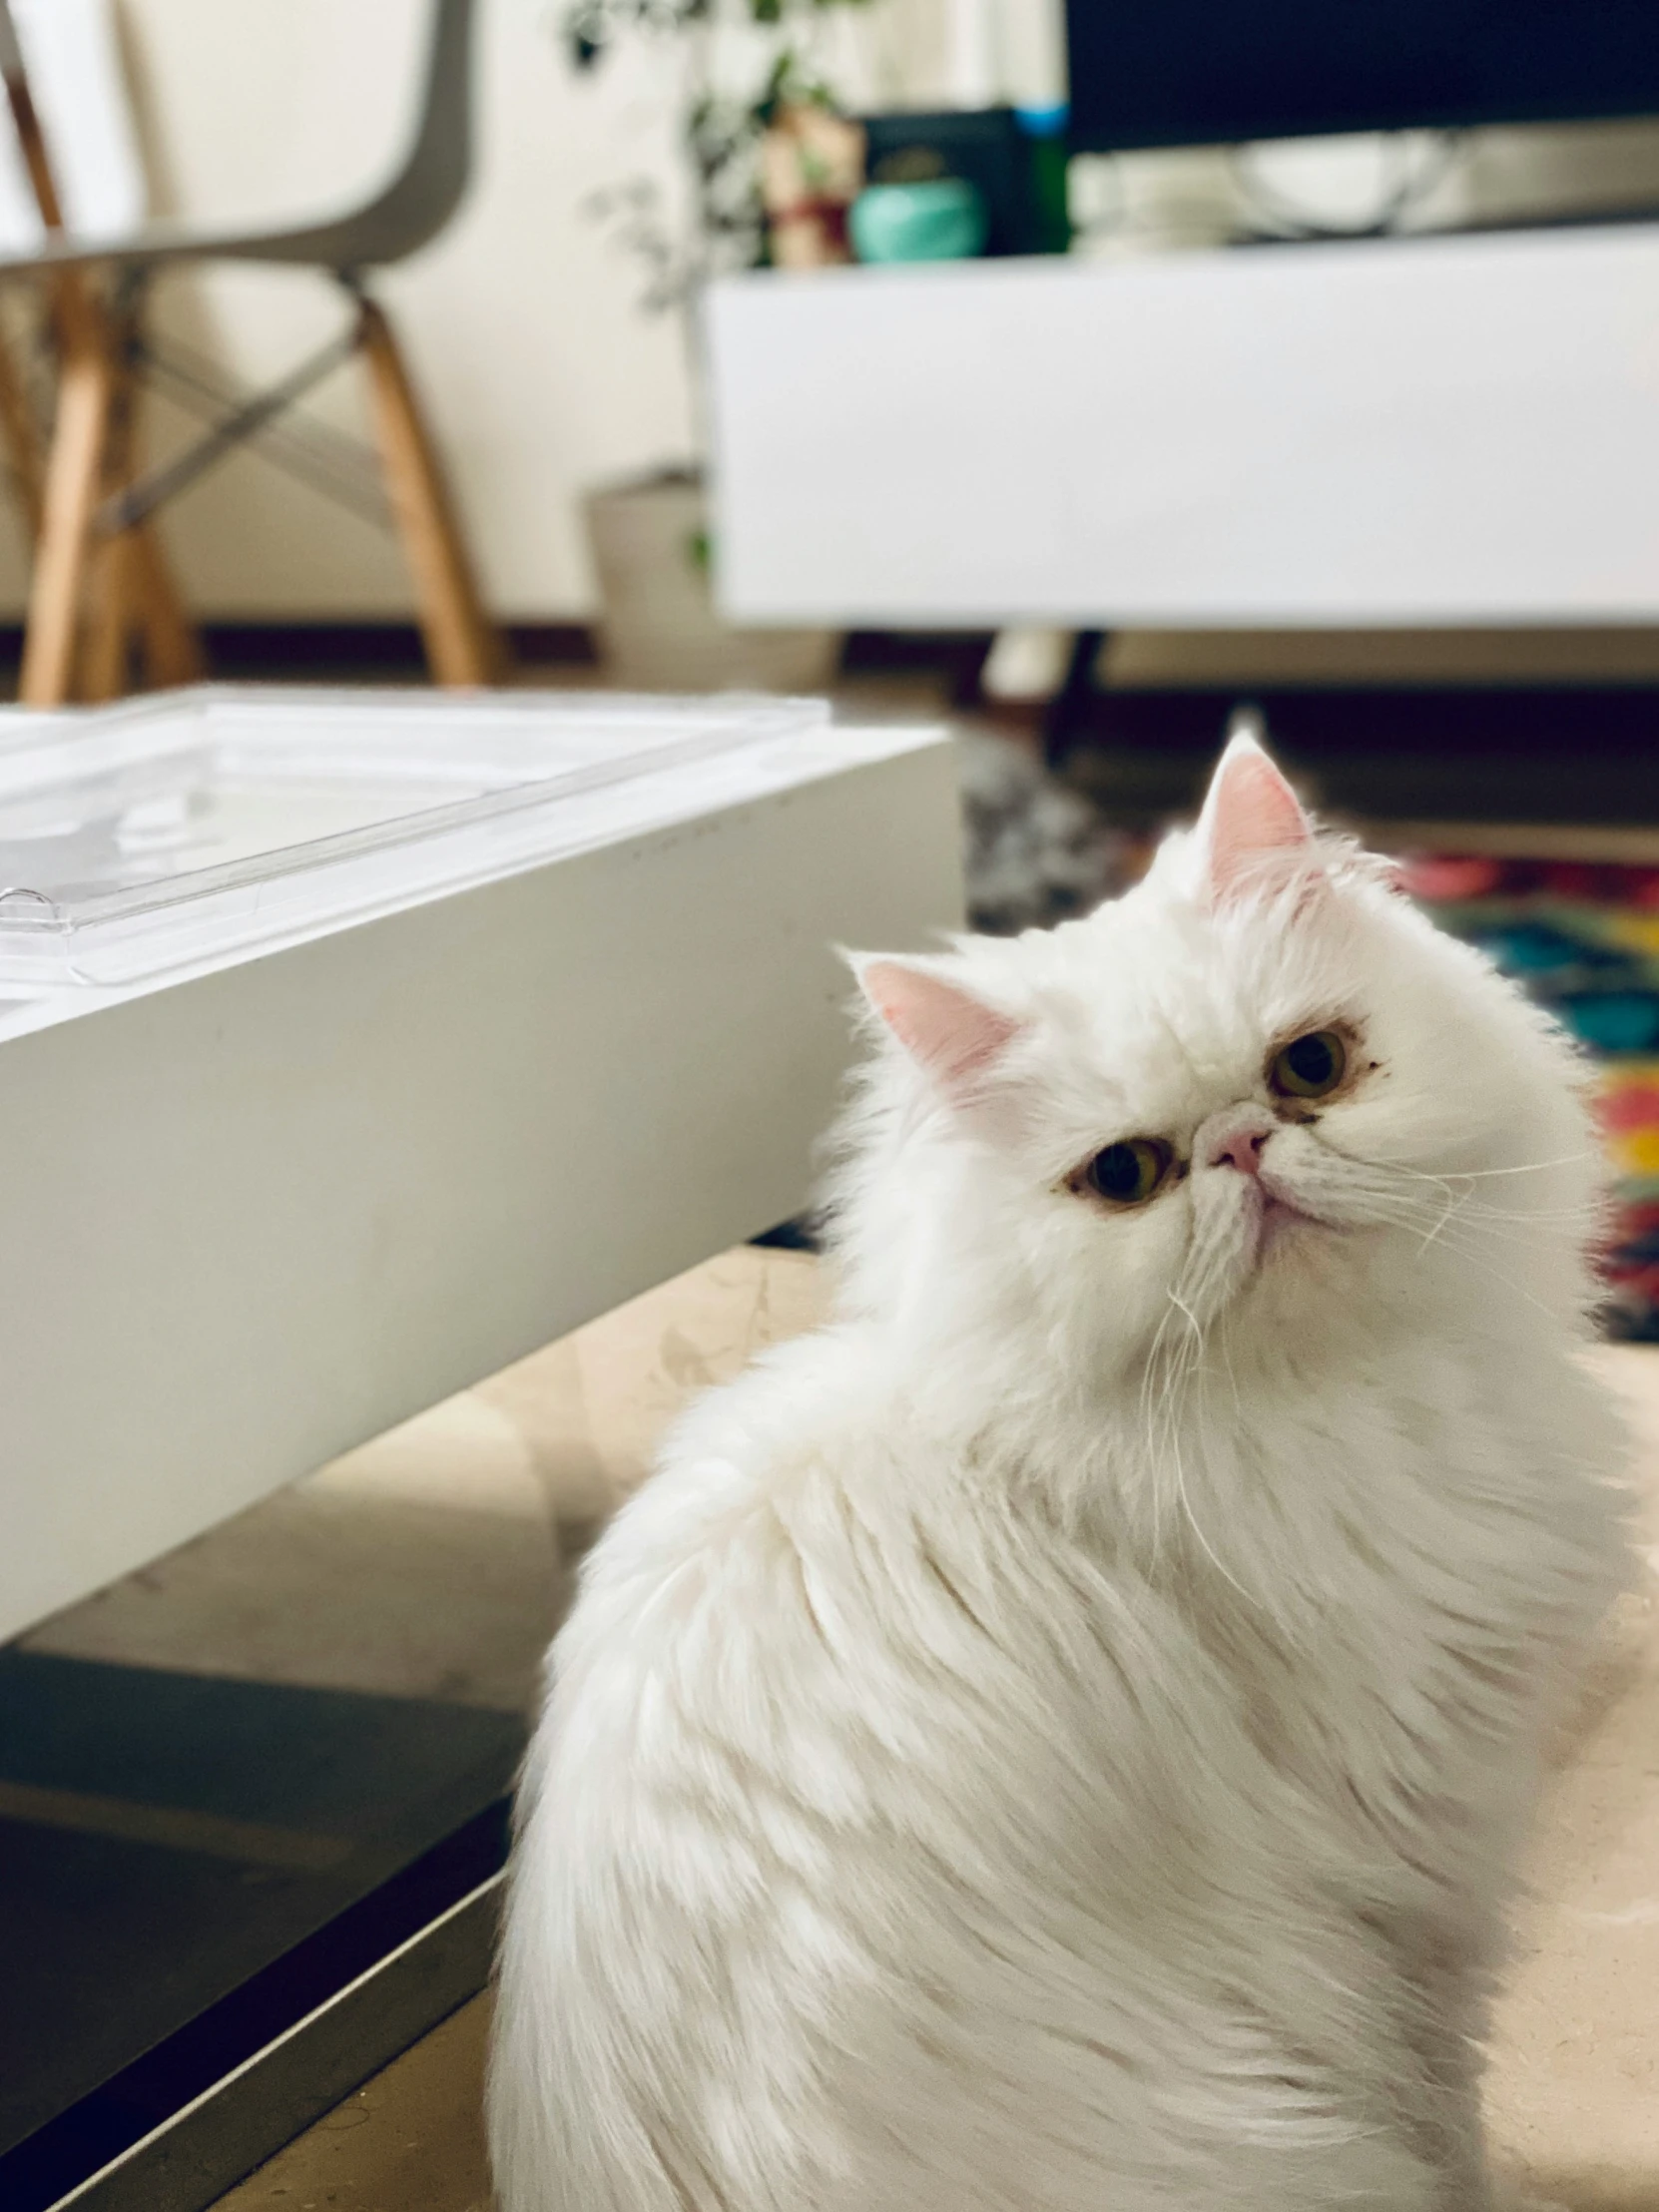 a white cat looks at soing, as it sits near a table